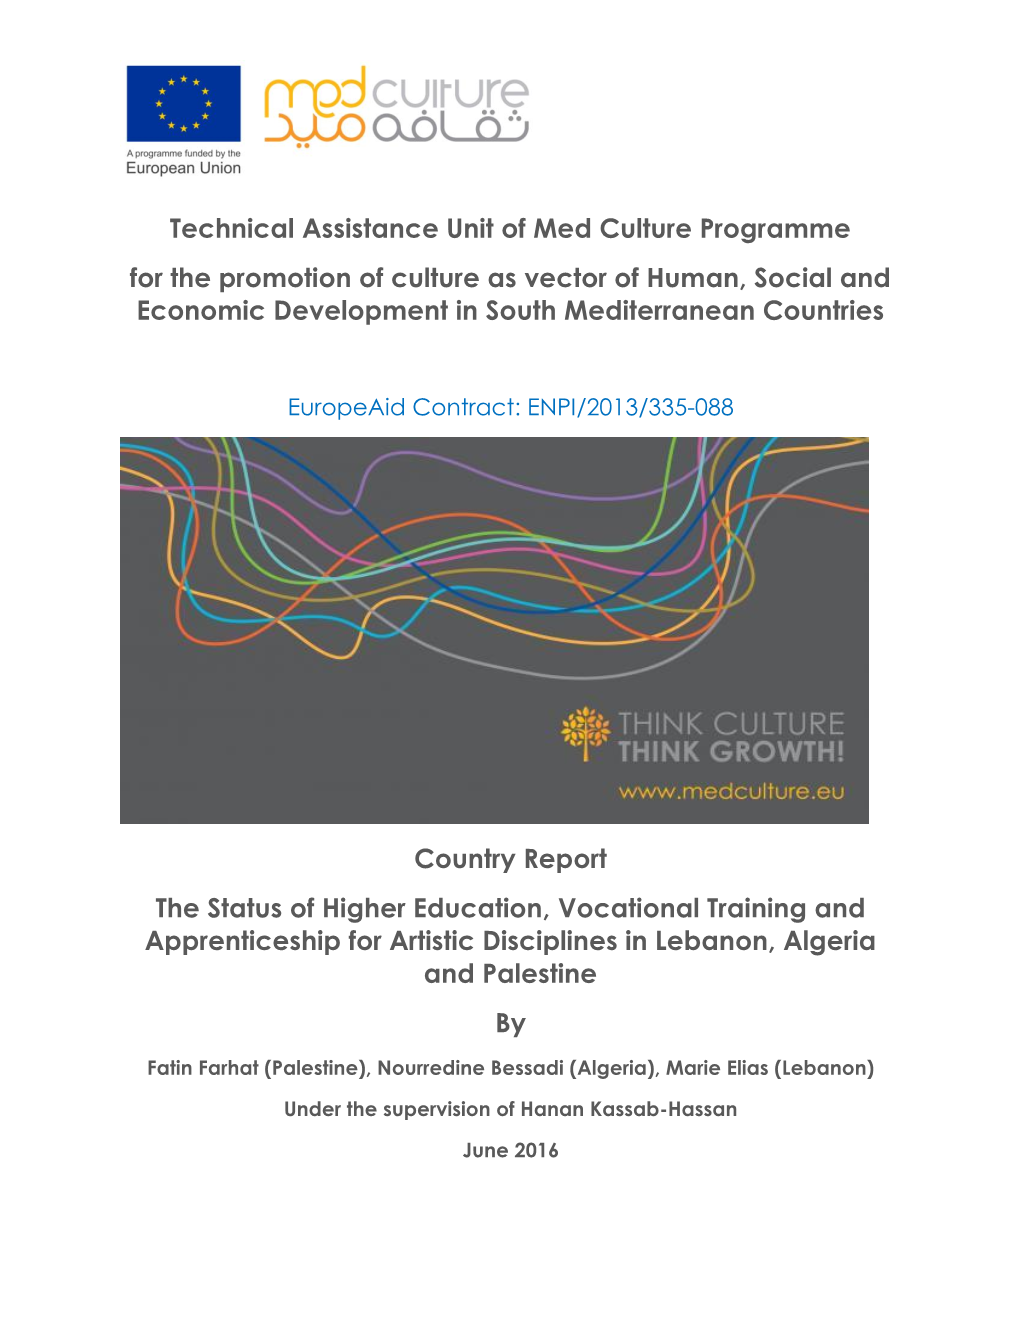 Country Report the Status of Higher Education, Vocational Training and Apprenticeship for Artistic Disciplines in Lebanon, Algeria and Palestine By